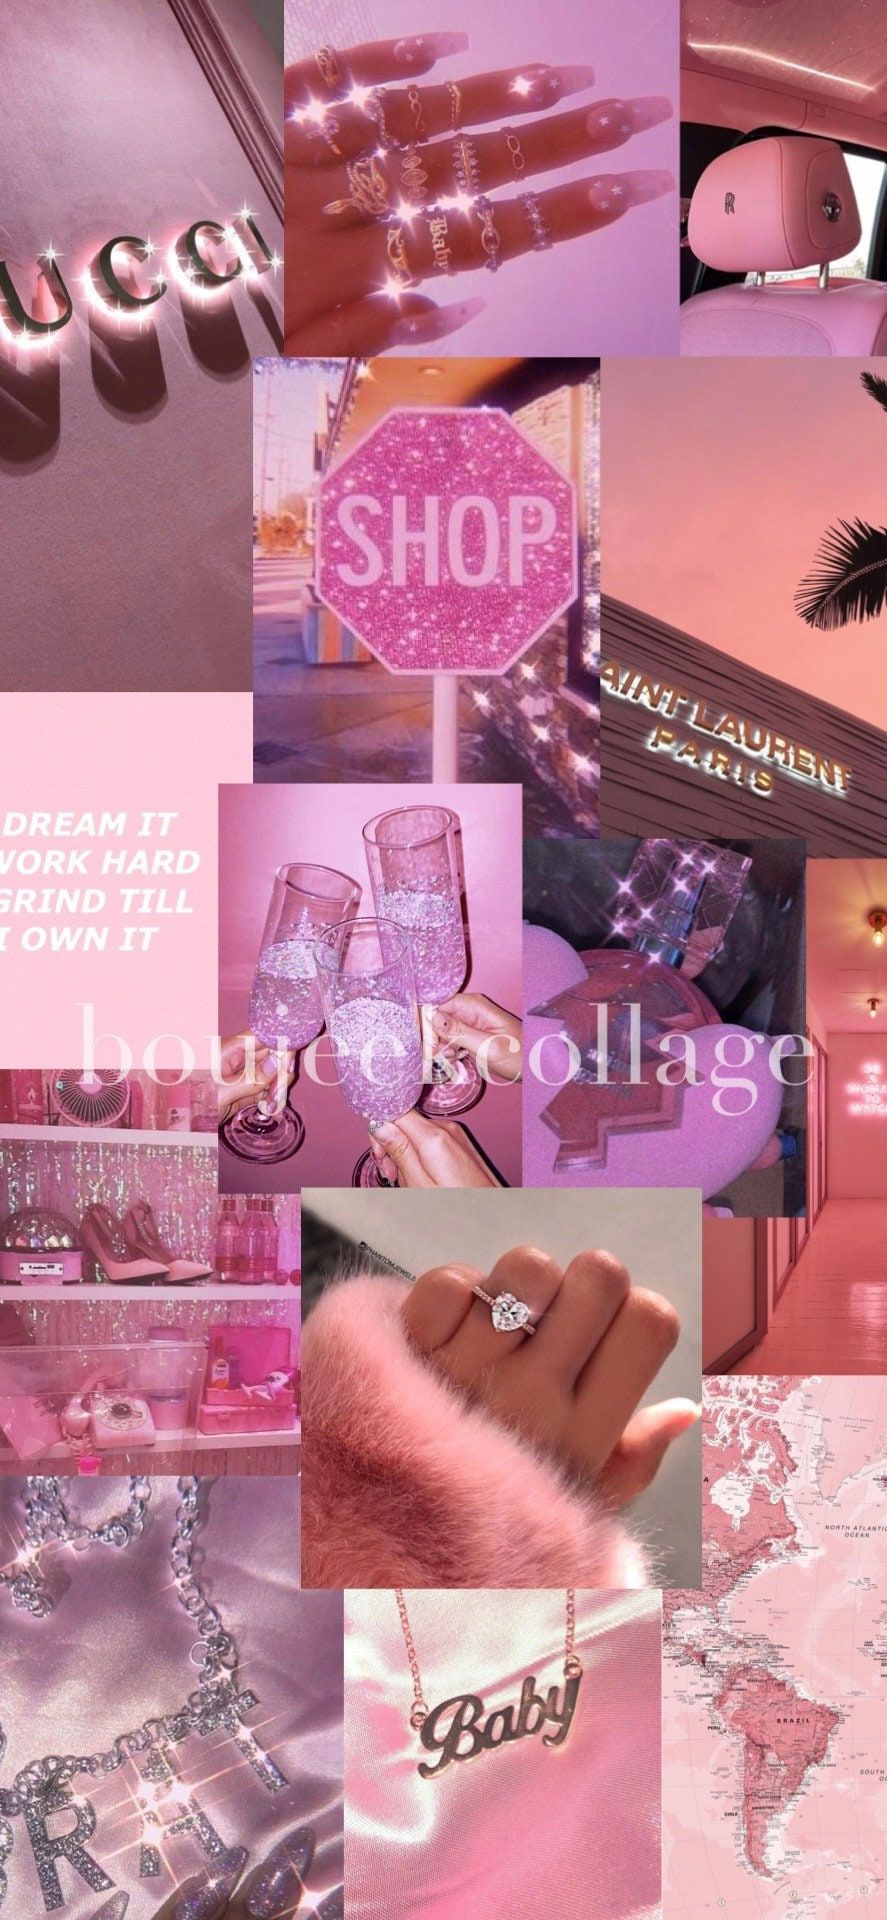 Aesthetic collage pink background with photos, text and images. - Pink collage